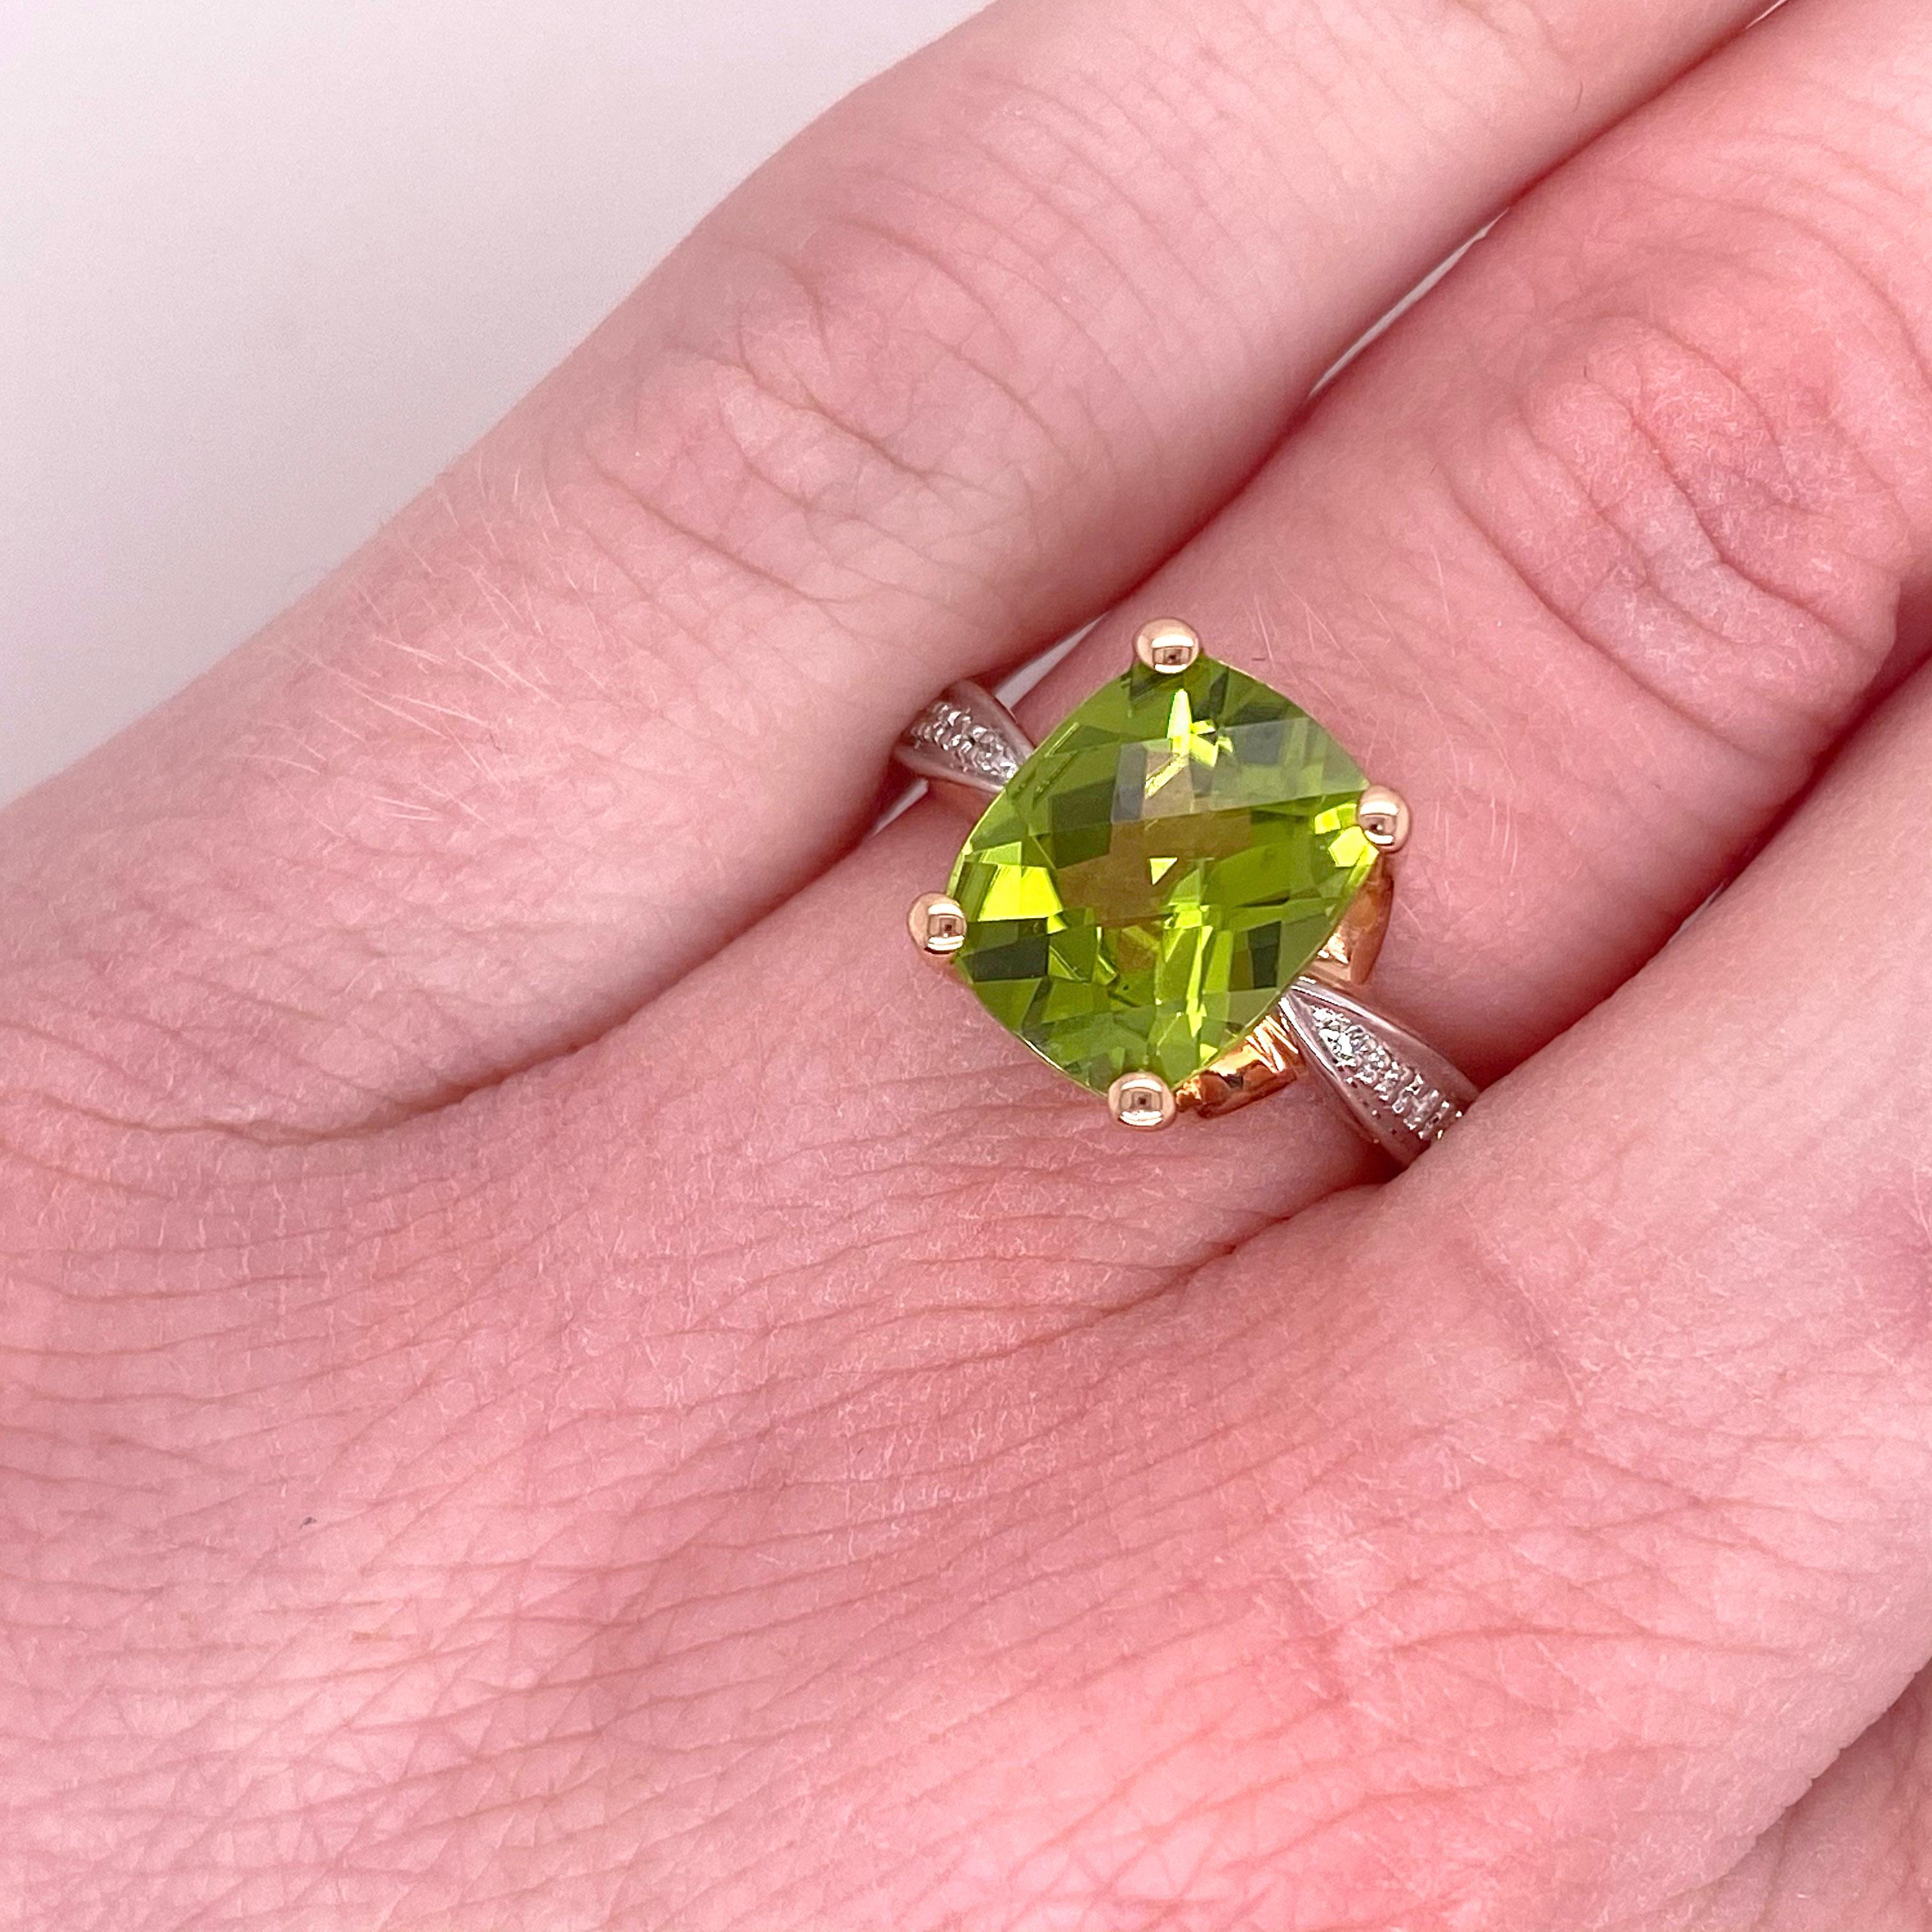 14K Rose Gold and White Gold
Diamond Number: 8
Diamond Weight: .06 Carats 
Gemstone: Green Peridot 
Gemstone Weight: 4.00 Carats
Ring Size: 7 (can be sized by your local jeweler)
Stone Width: 11.07 x 9.02 millimeters 
Band Width: 3.07 millimeters